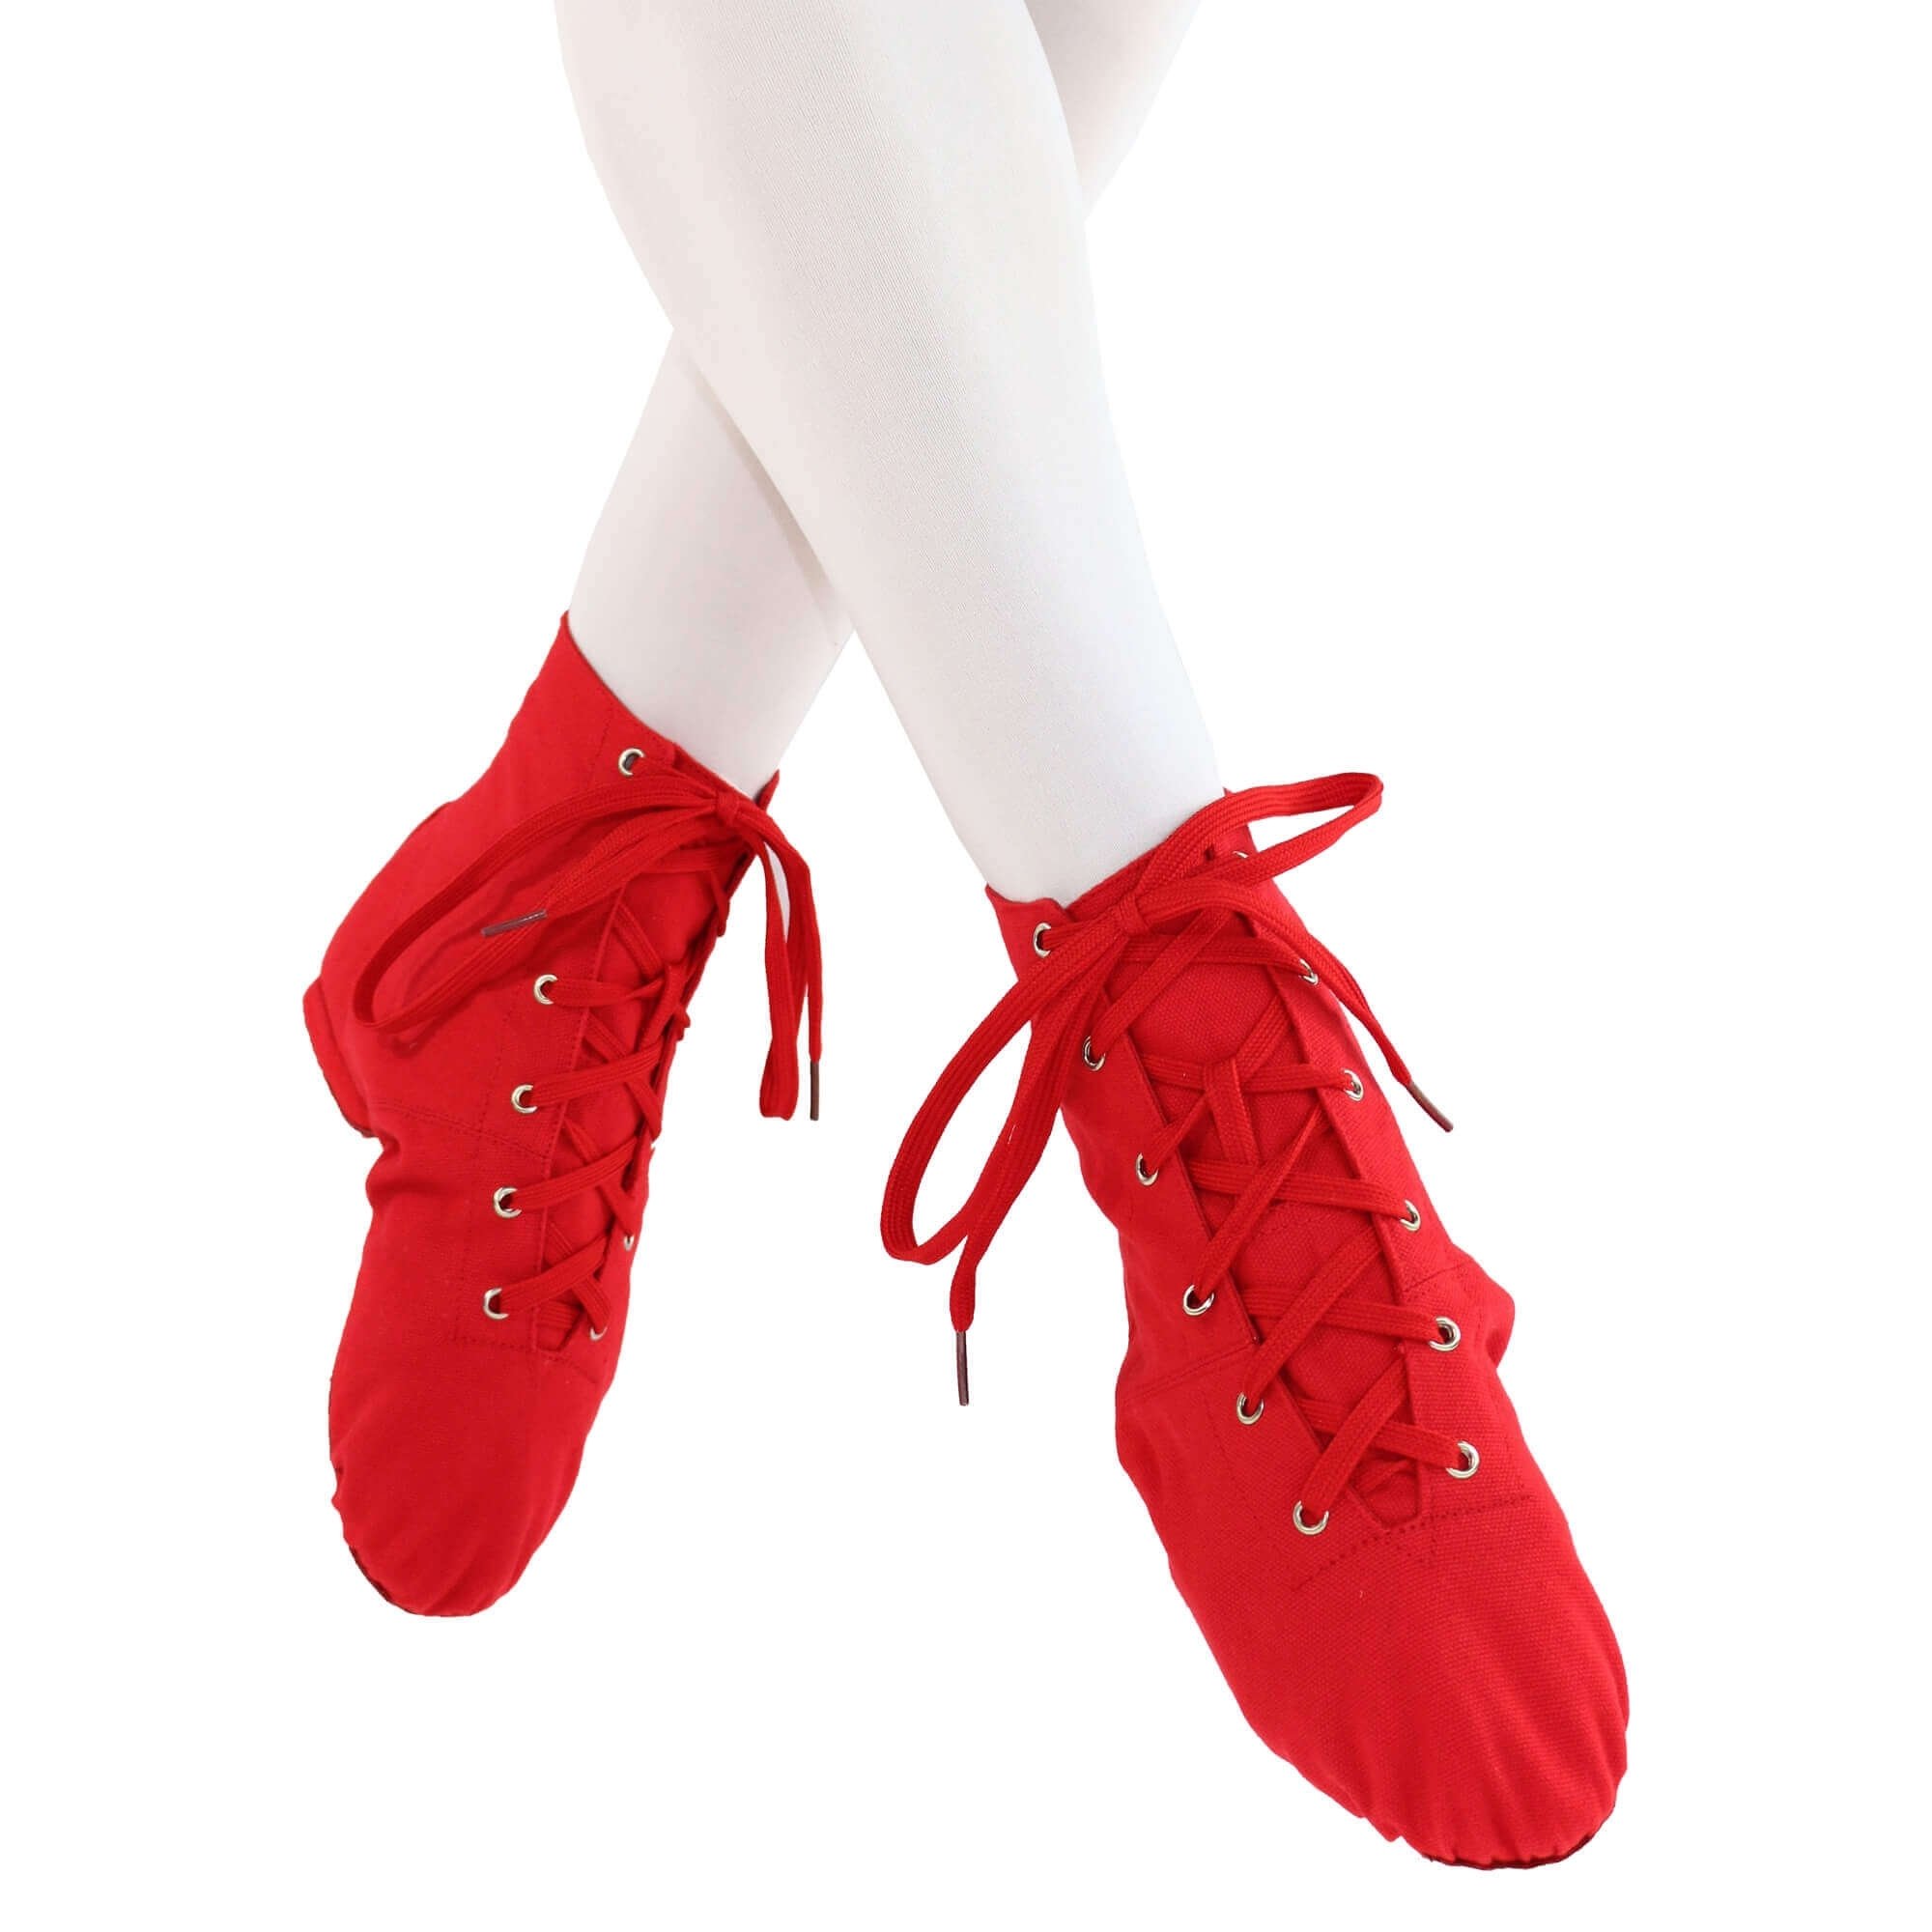 Danzcue Adult Canvas Jazz Shoes - Click Image to Close